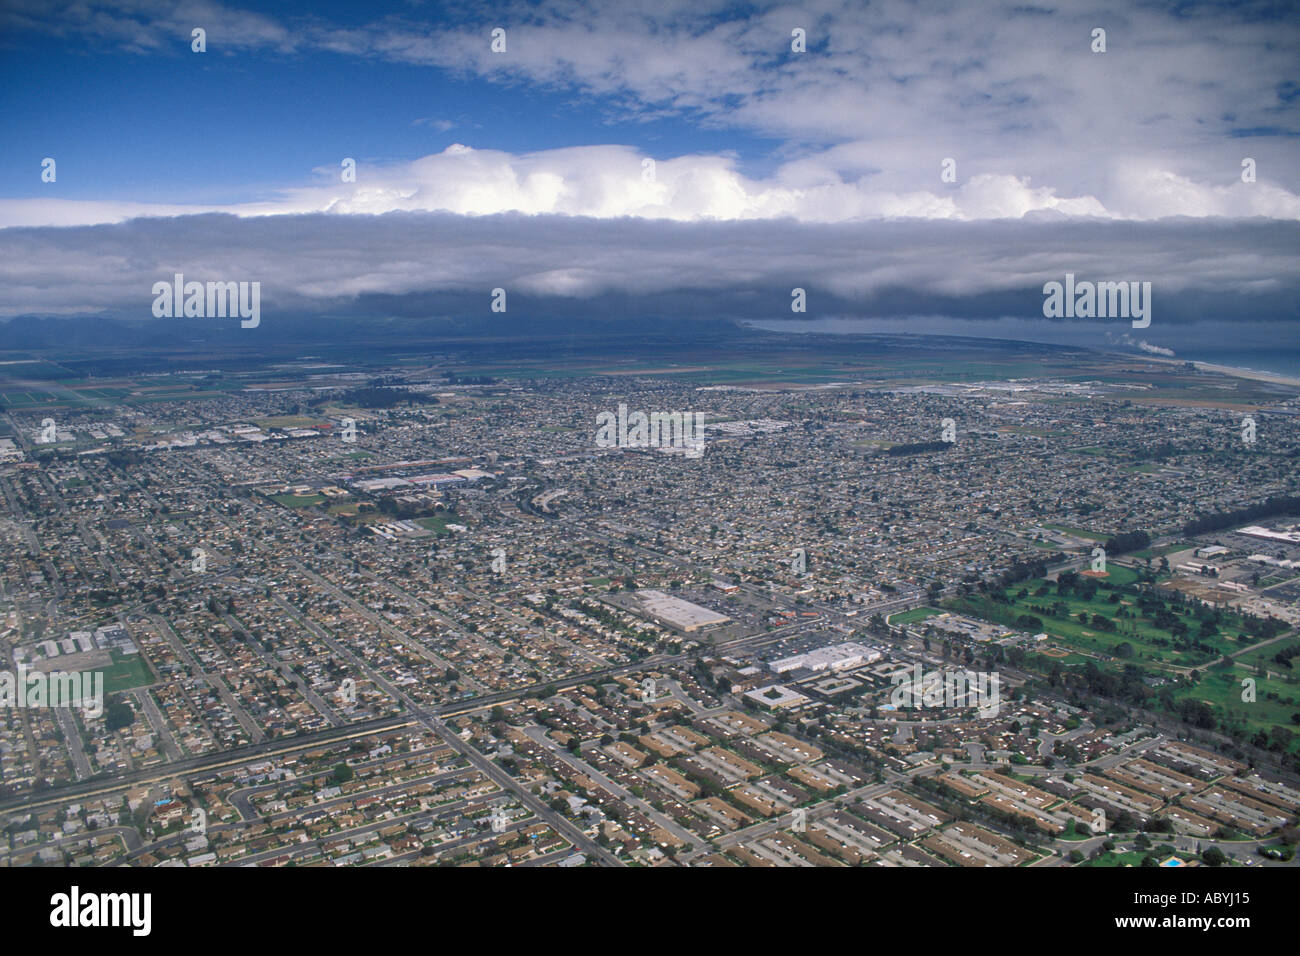 Aerial view of storm clouds over the suburban Ventura county coast California  Stock Photo